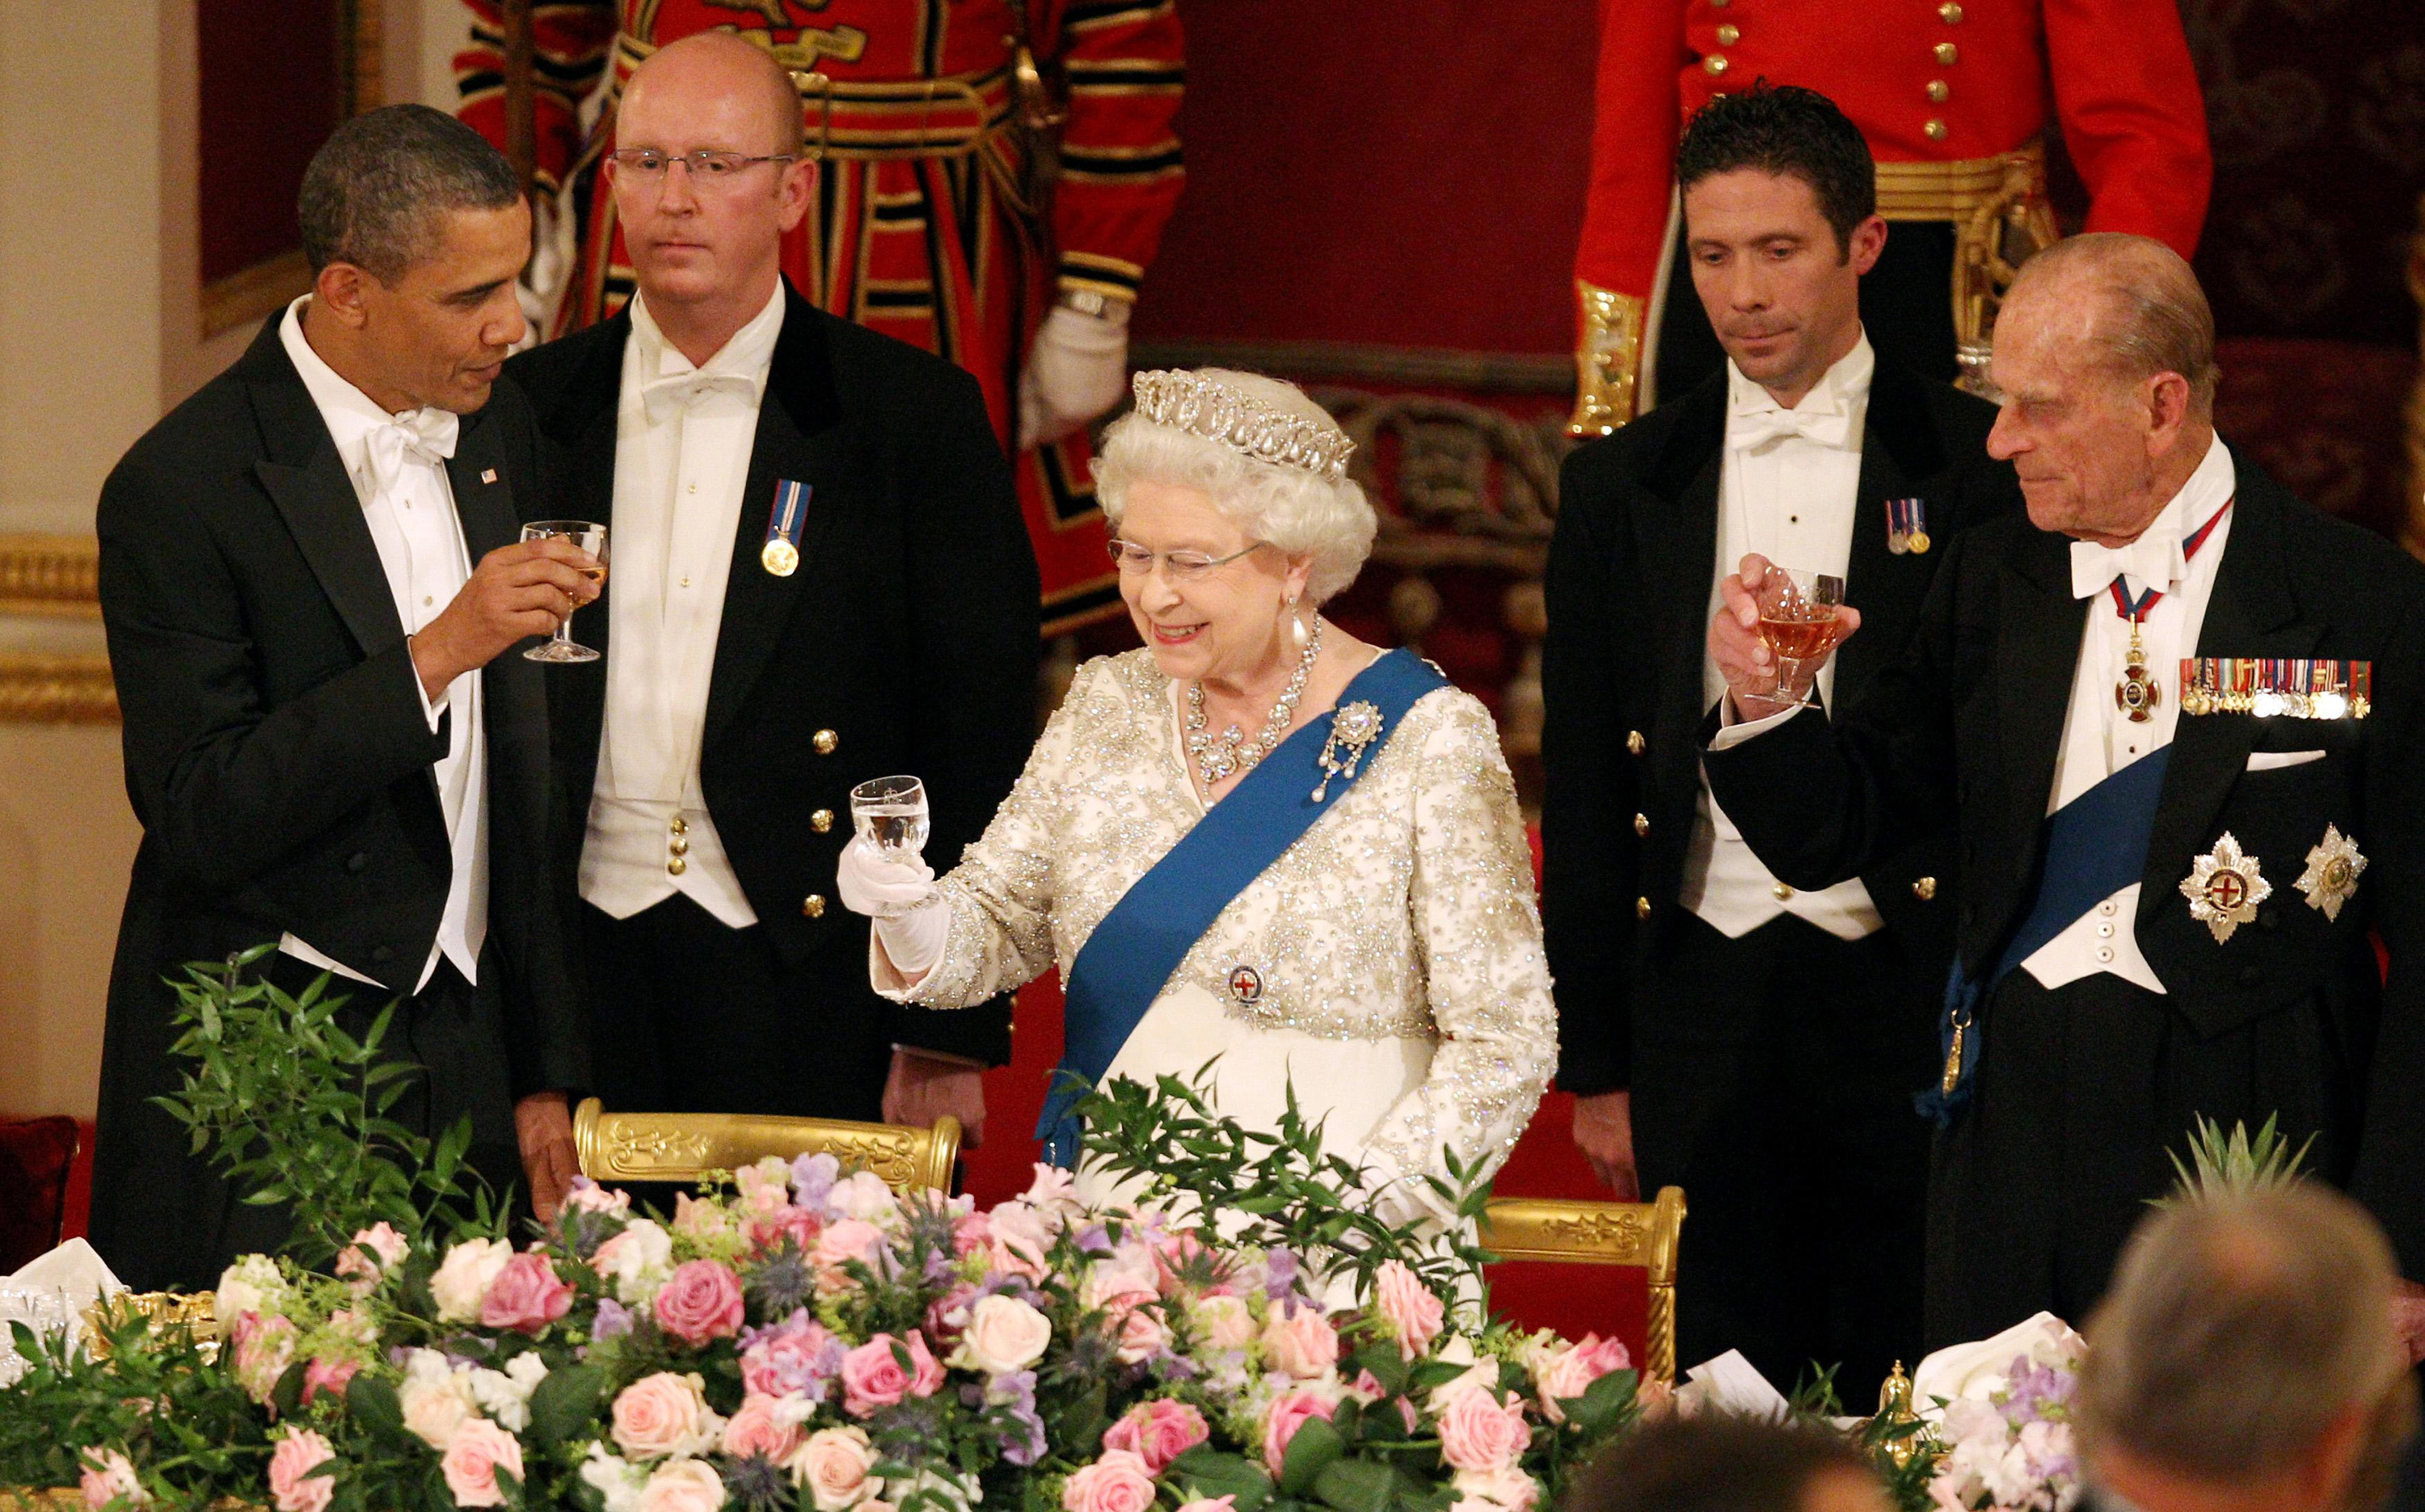 Queen Elizabeth II, US President Barack Obama and the Duke of Edinburgh during a State Banquet in Buckingham Palace in 2011